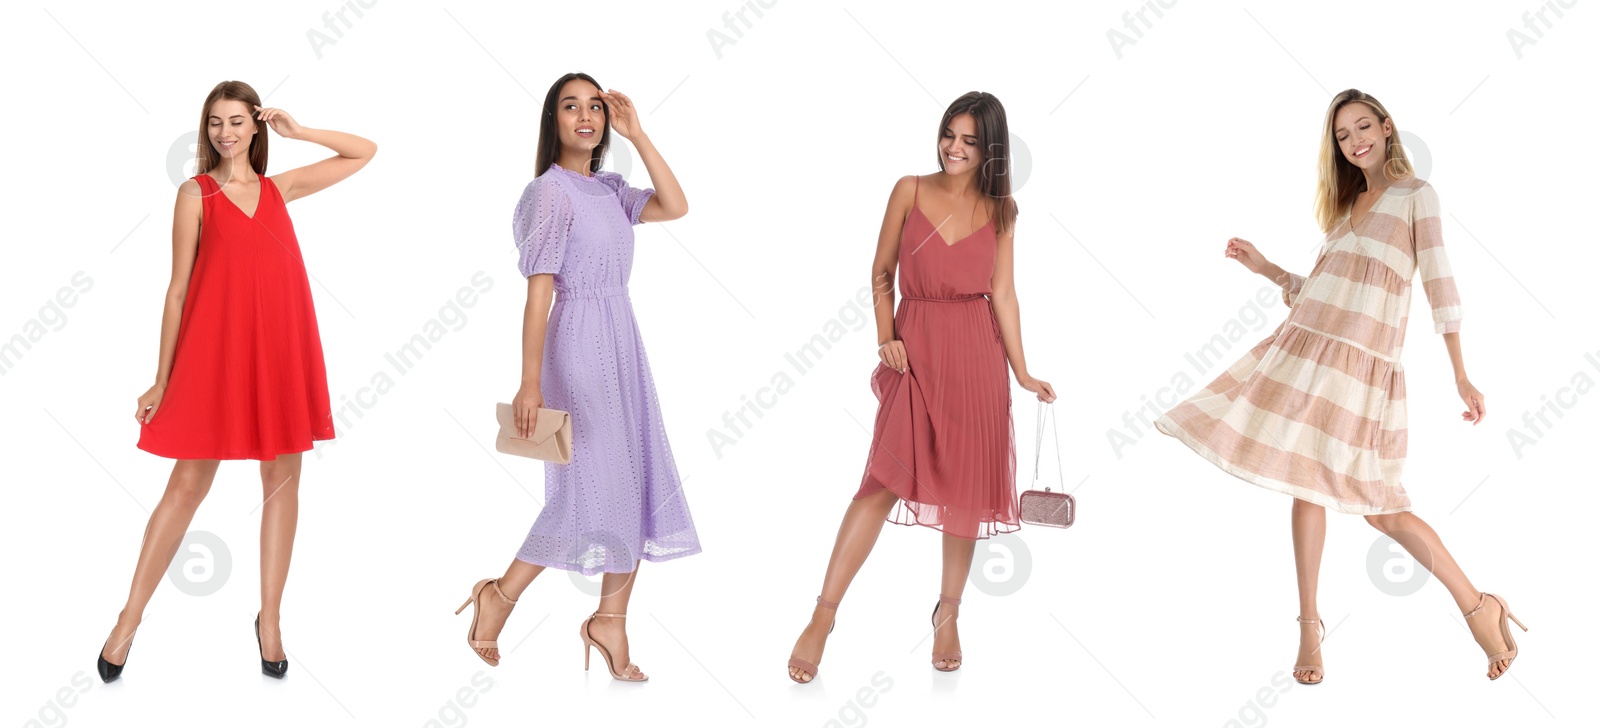 Image of Collage with photos of women wearing different dresses on white background. Banner design 